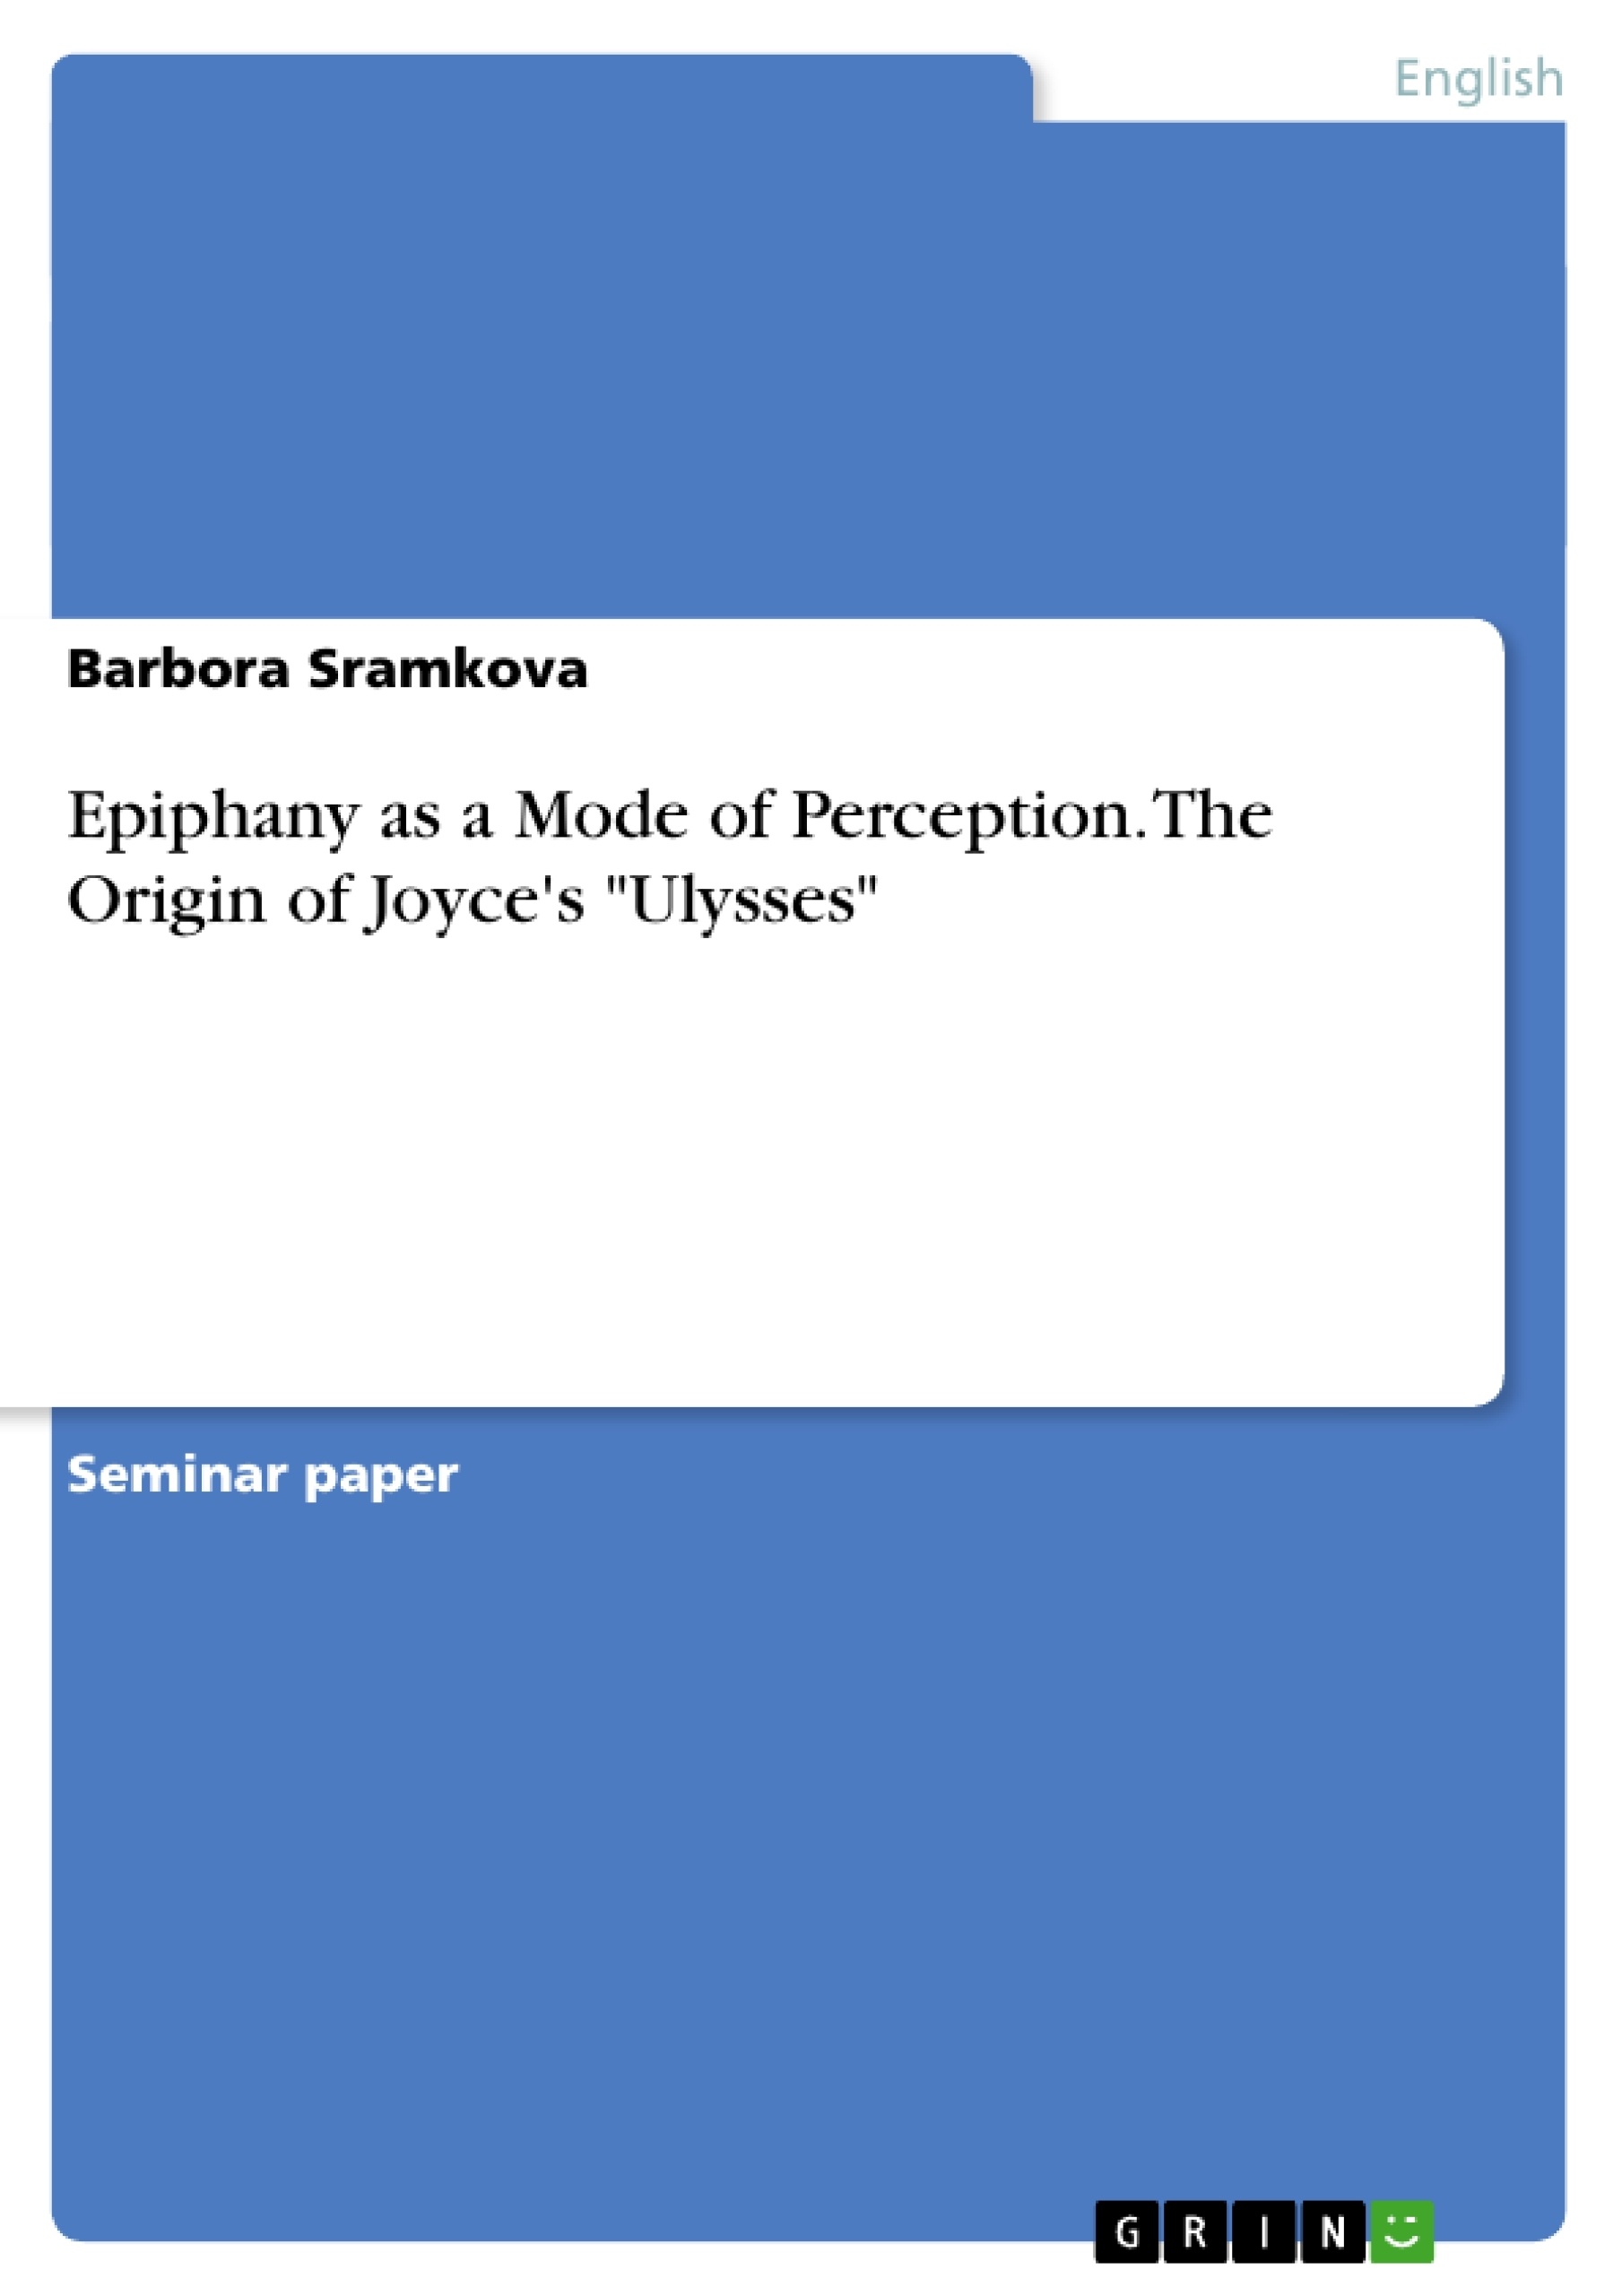 Title: Epiphany as a Mode of Perception. The Origin of Joyce's  "Ulysses"